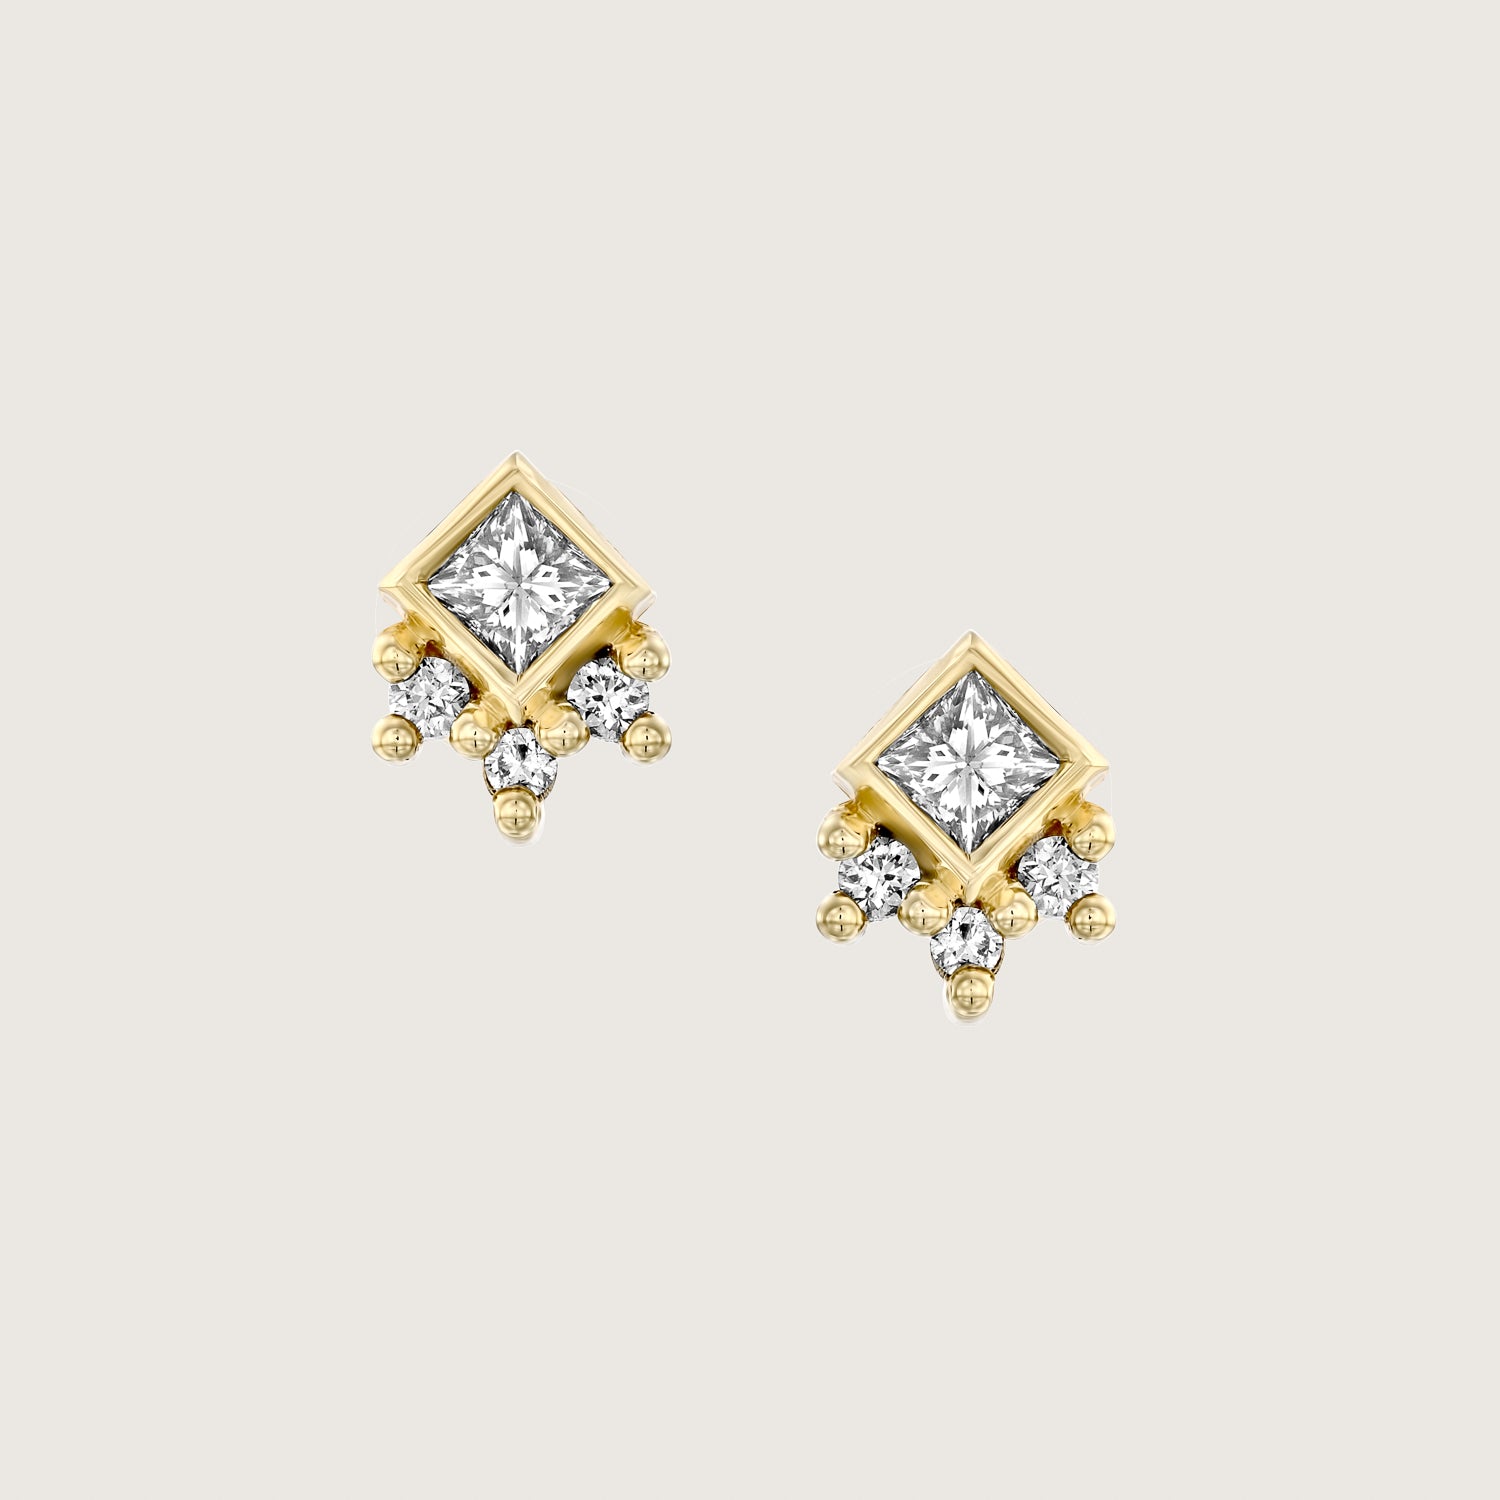 Veronica piercing earring with white diamonds